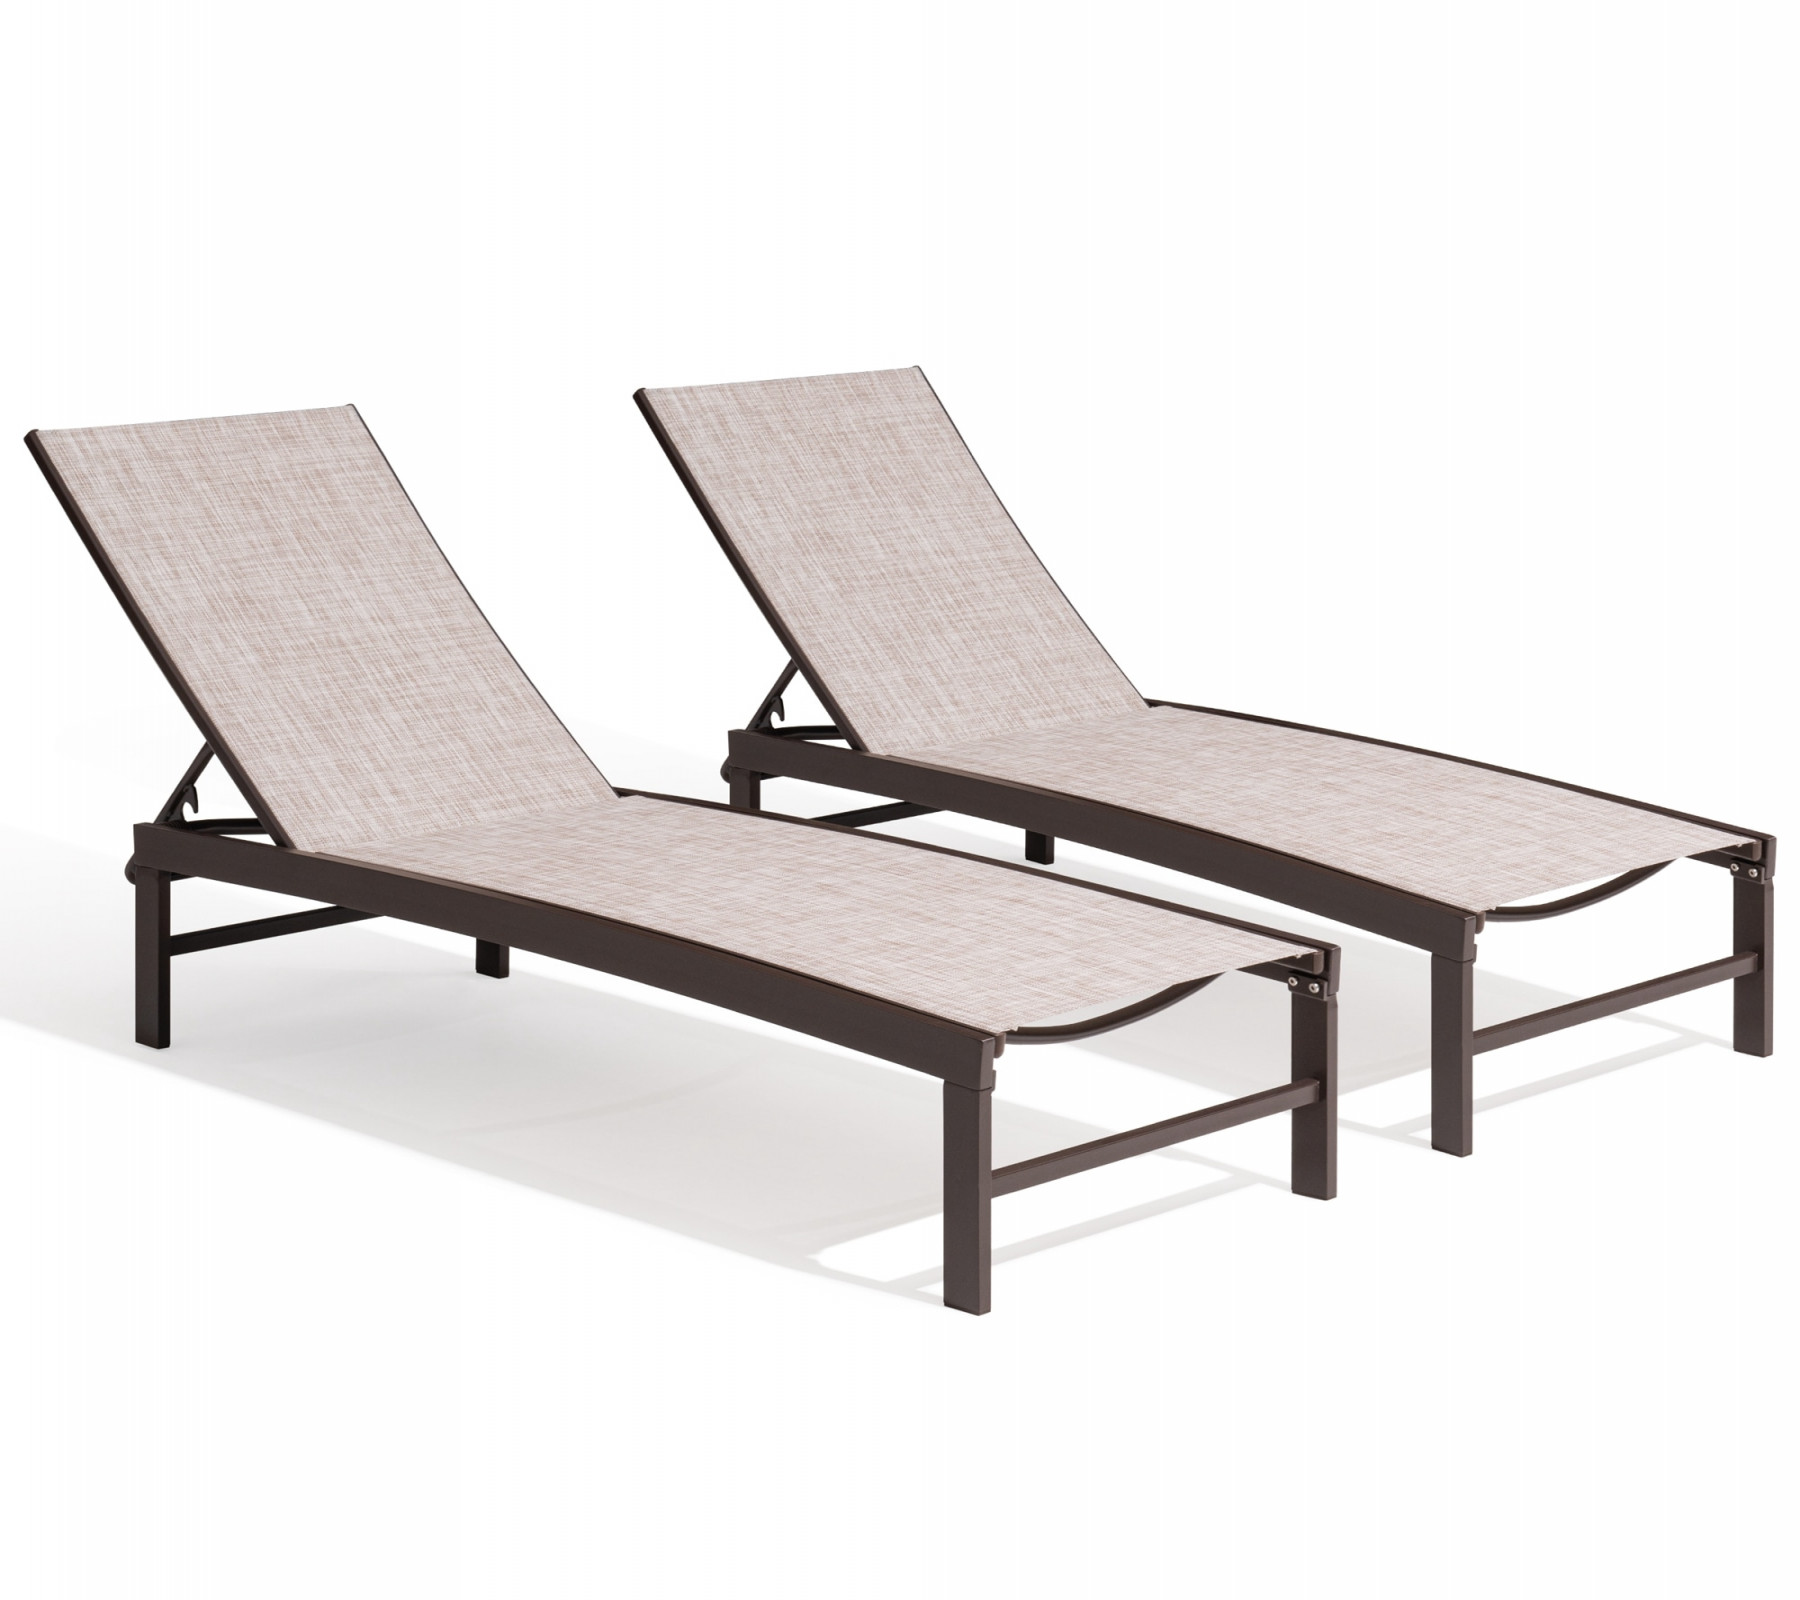 Crestlive Products Patio chaise lounge Set of  Aluminum Frame In Brown  Finish Metal Frame Stationary Chaise Lounge Chair(s) with Off-white  Textilene